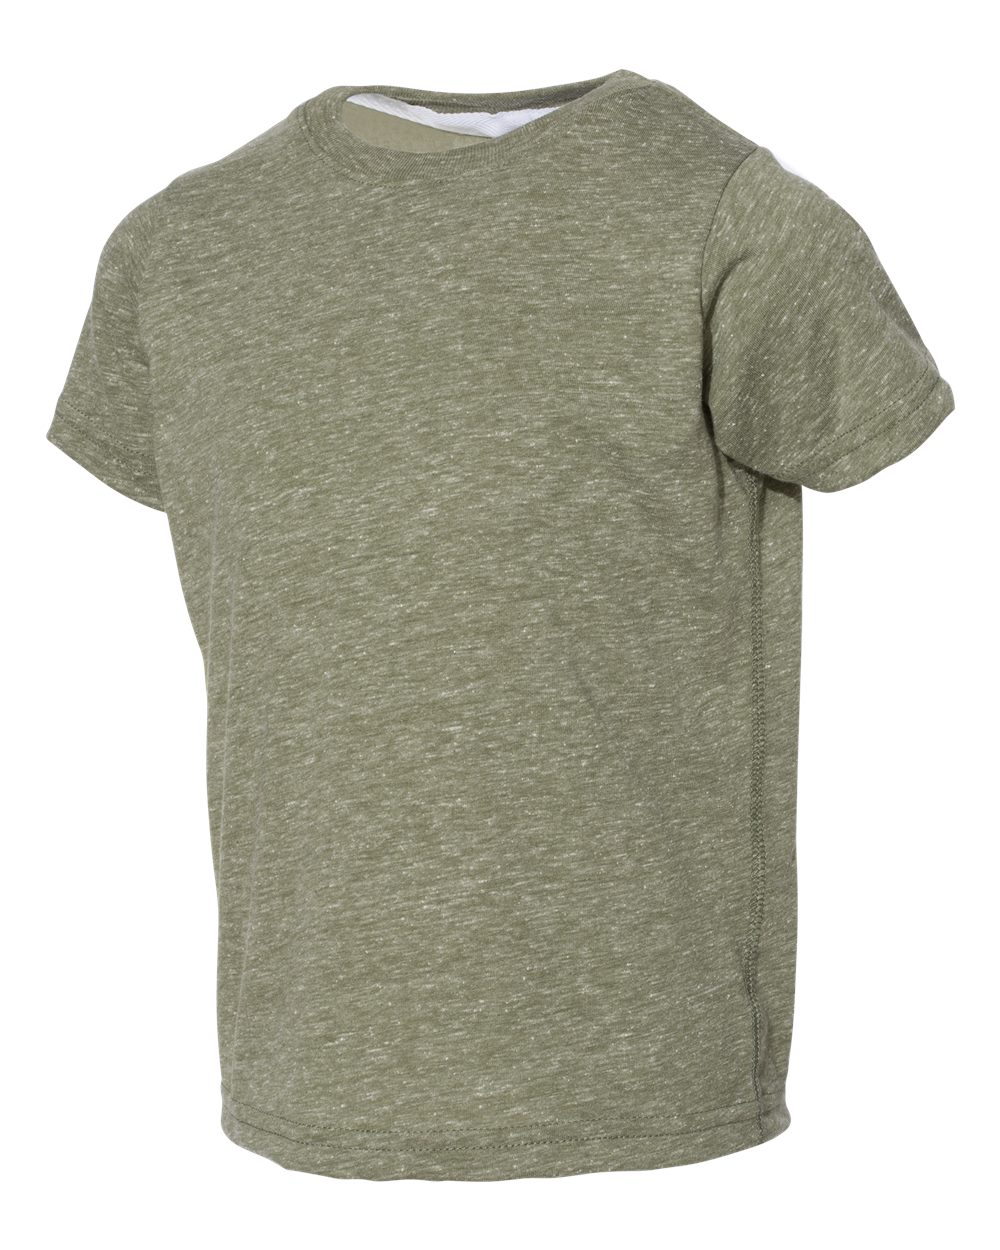 click to view Military Green Melange